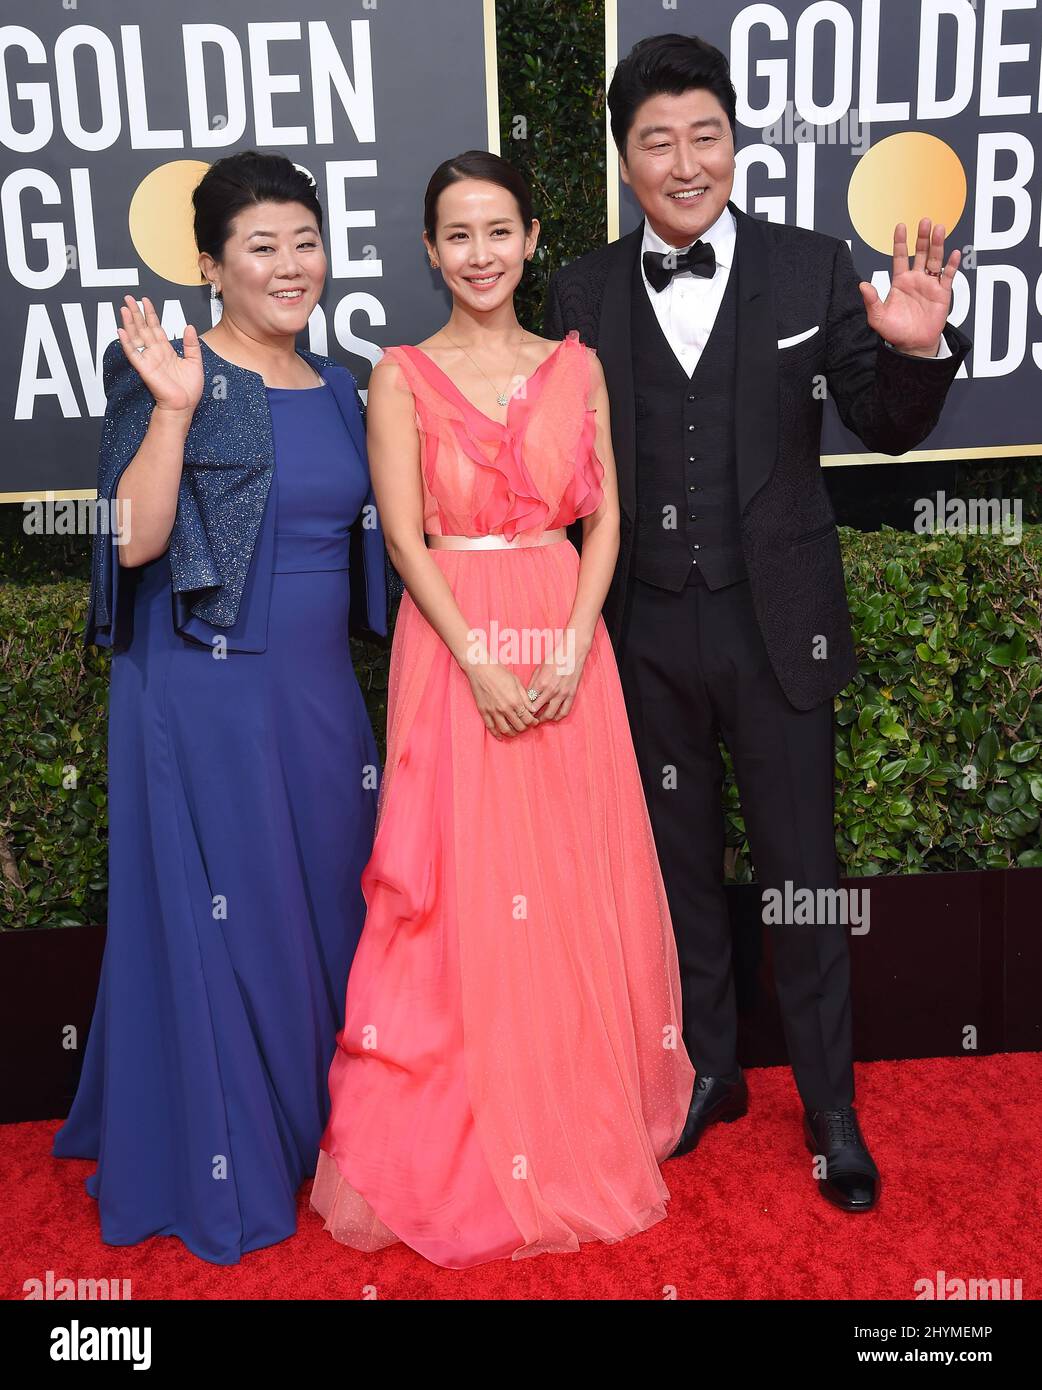 Lee Jeong-eun, Cho Yeo-jeong and Song Kang-ho at the 77th Golden Globe Awards held at the Beverly Hilton Hotel on January 5, 2020 in Beverly Hills, Los Angeles. Stock Photo